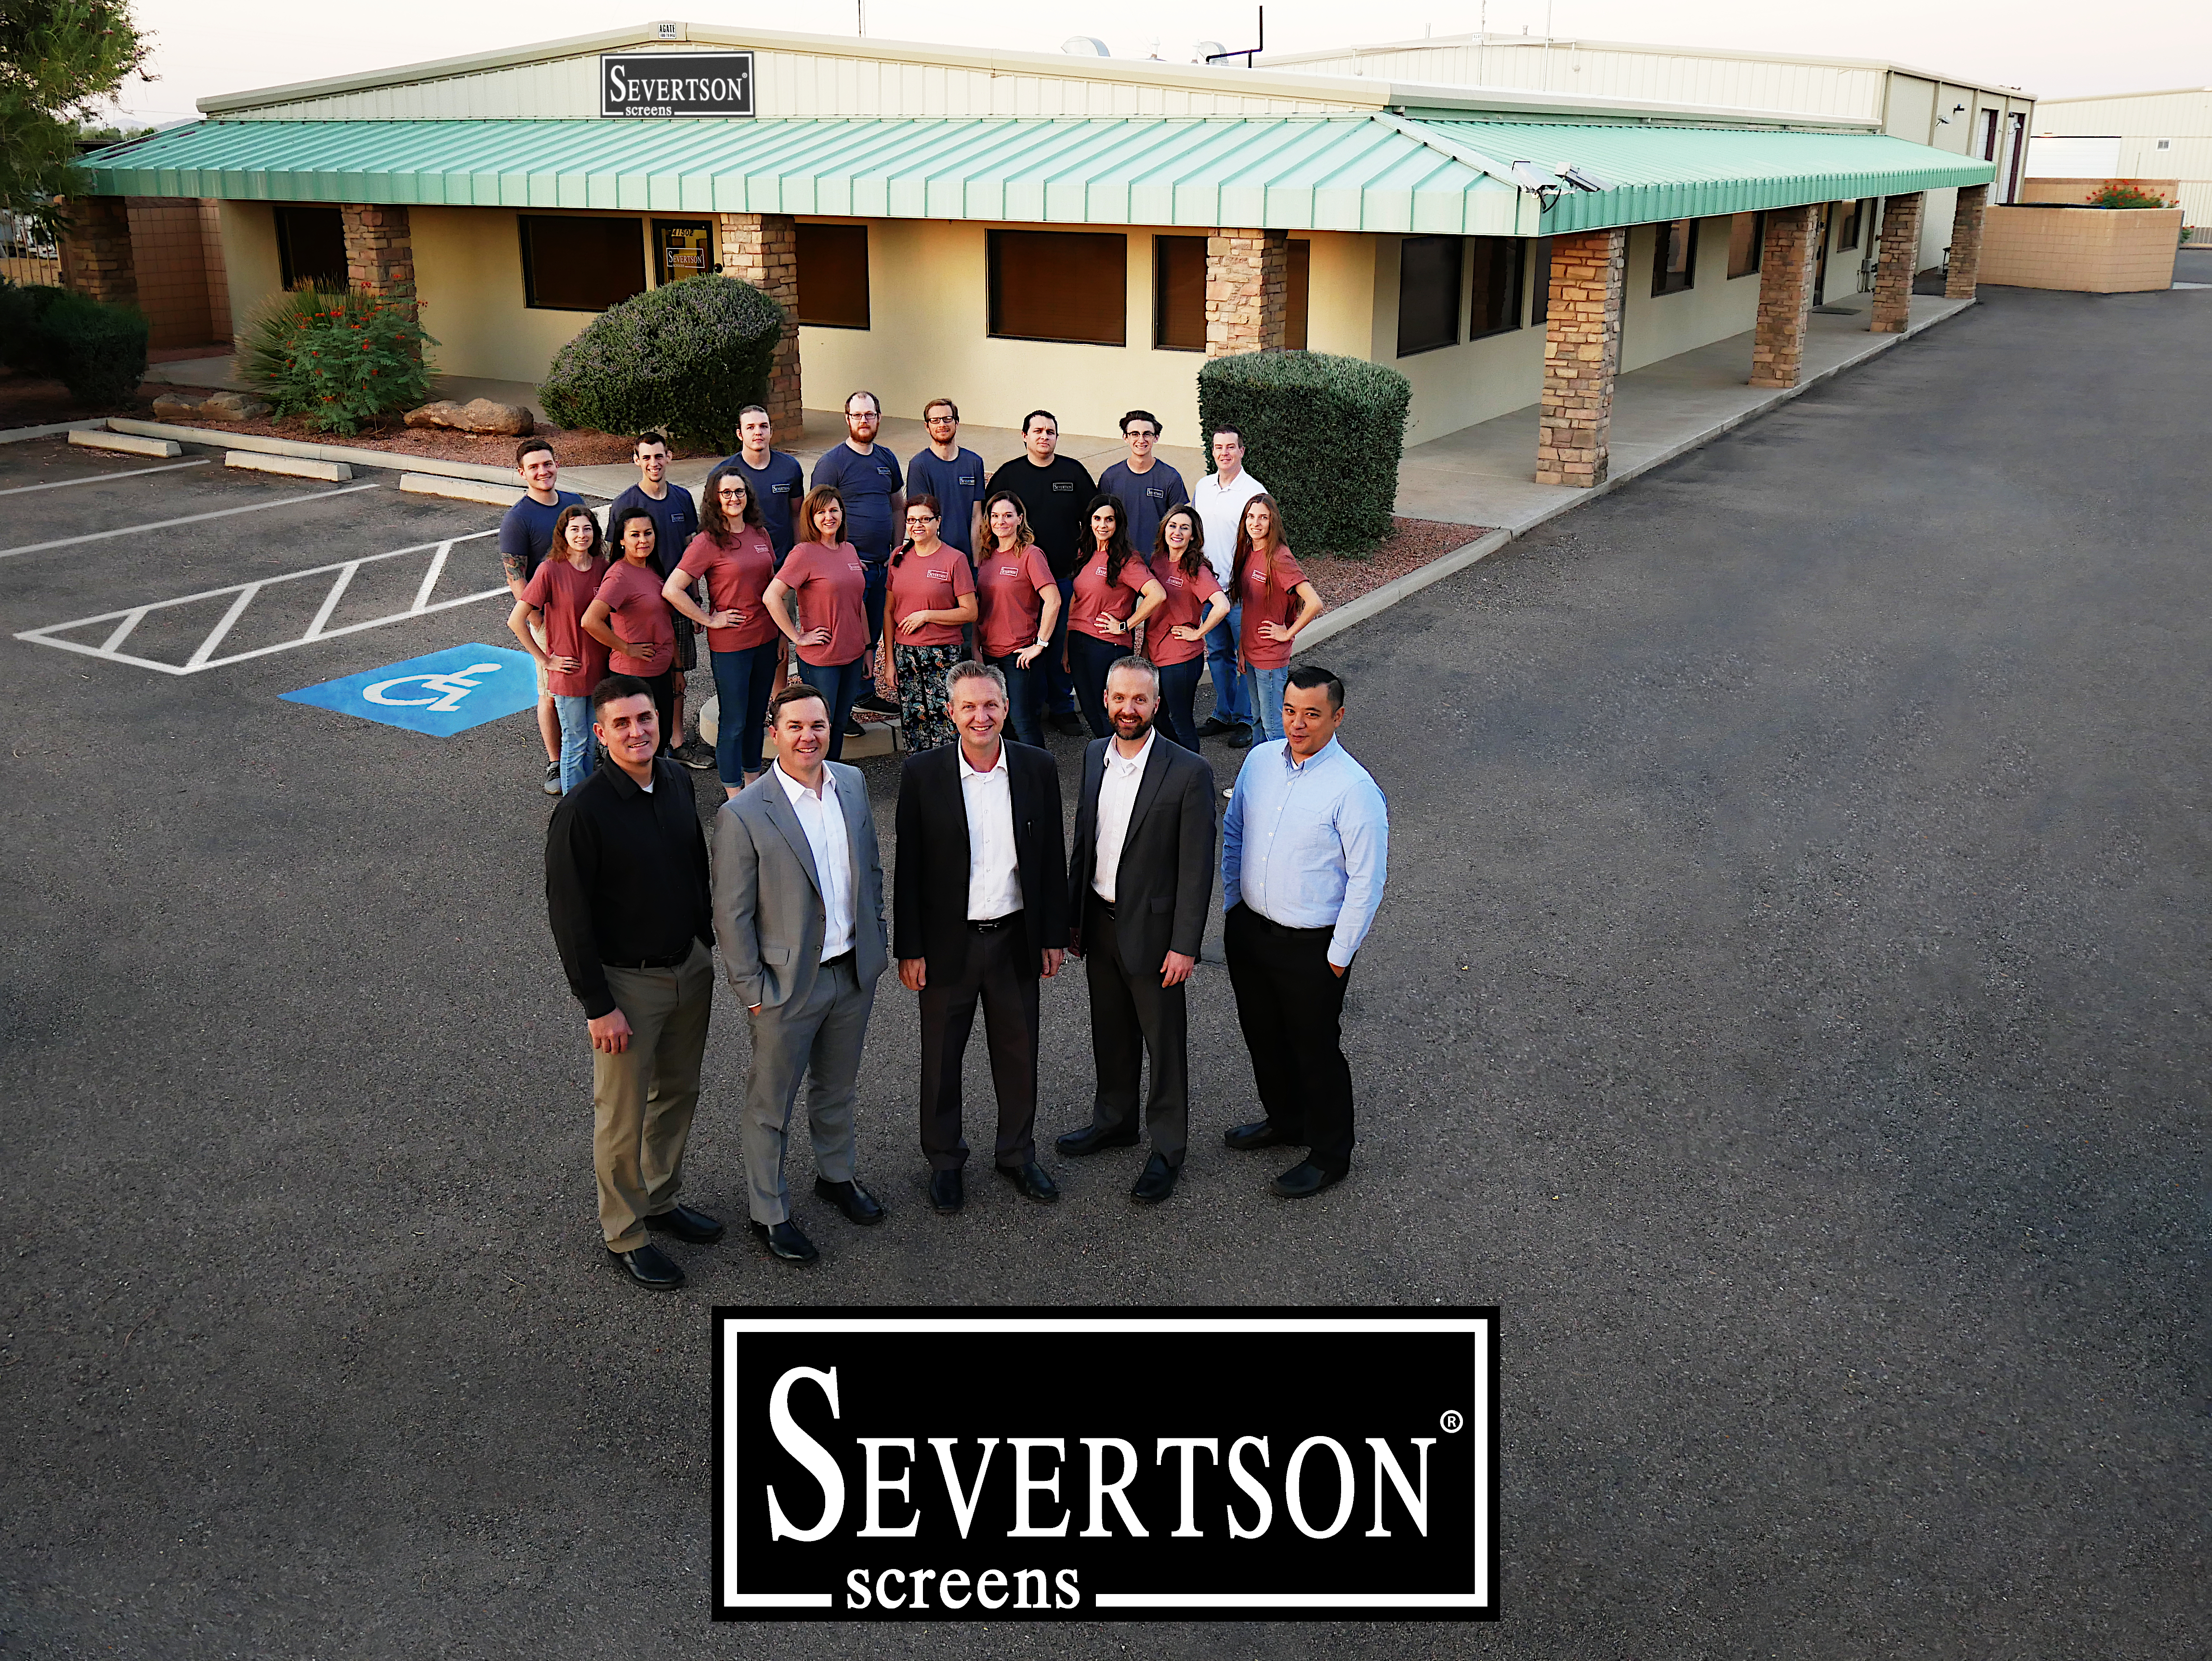 Severtson employees pose for a photo in front of the new Severtson facility in San Tan Valley, Arizona